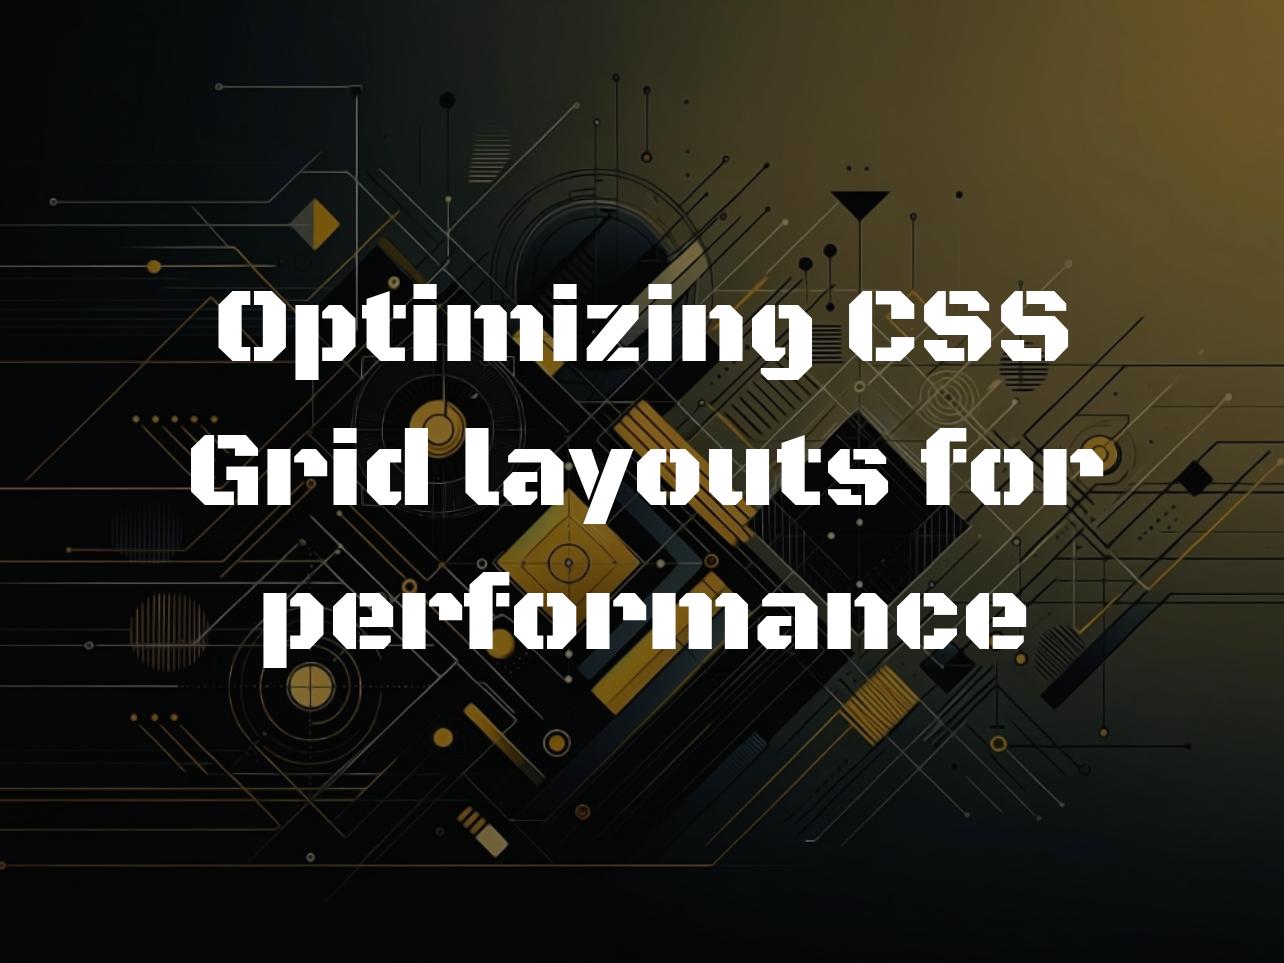 Optimizing CSS Grid layouts for performance